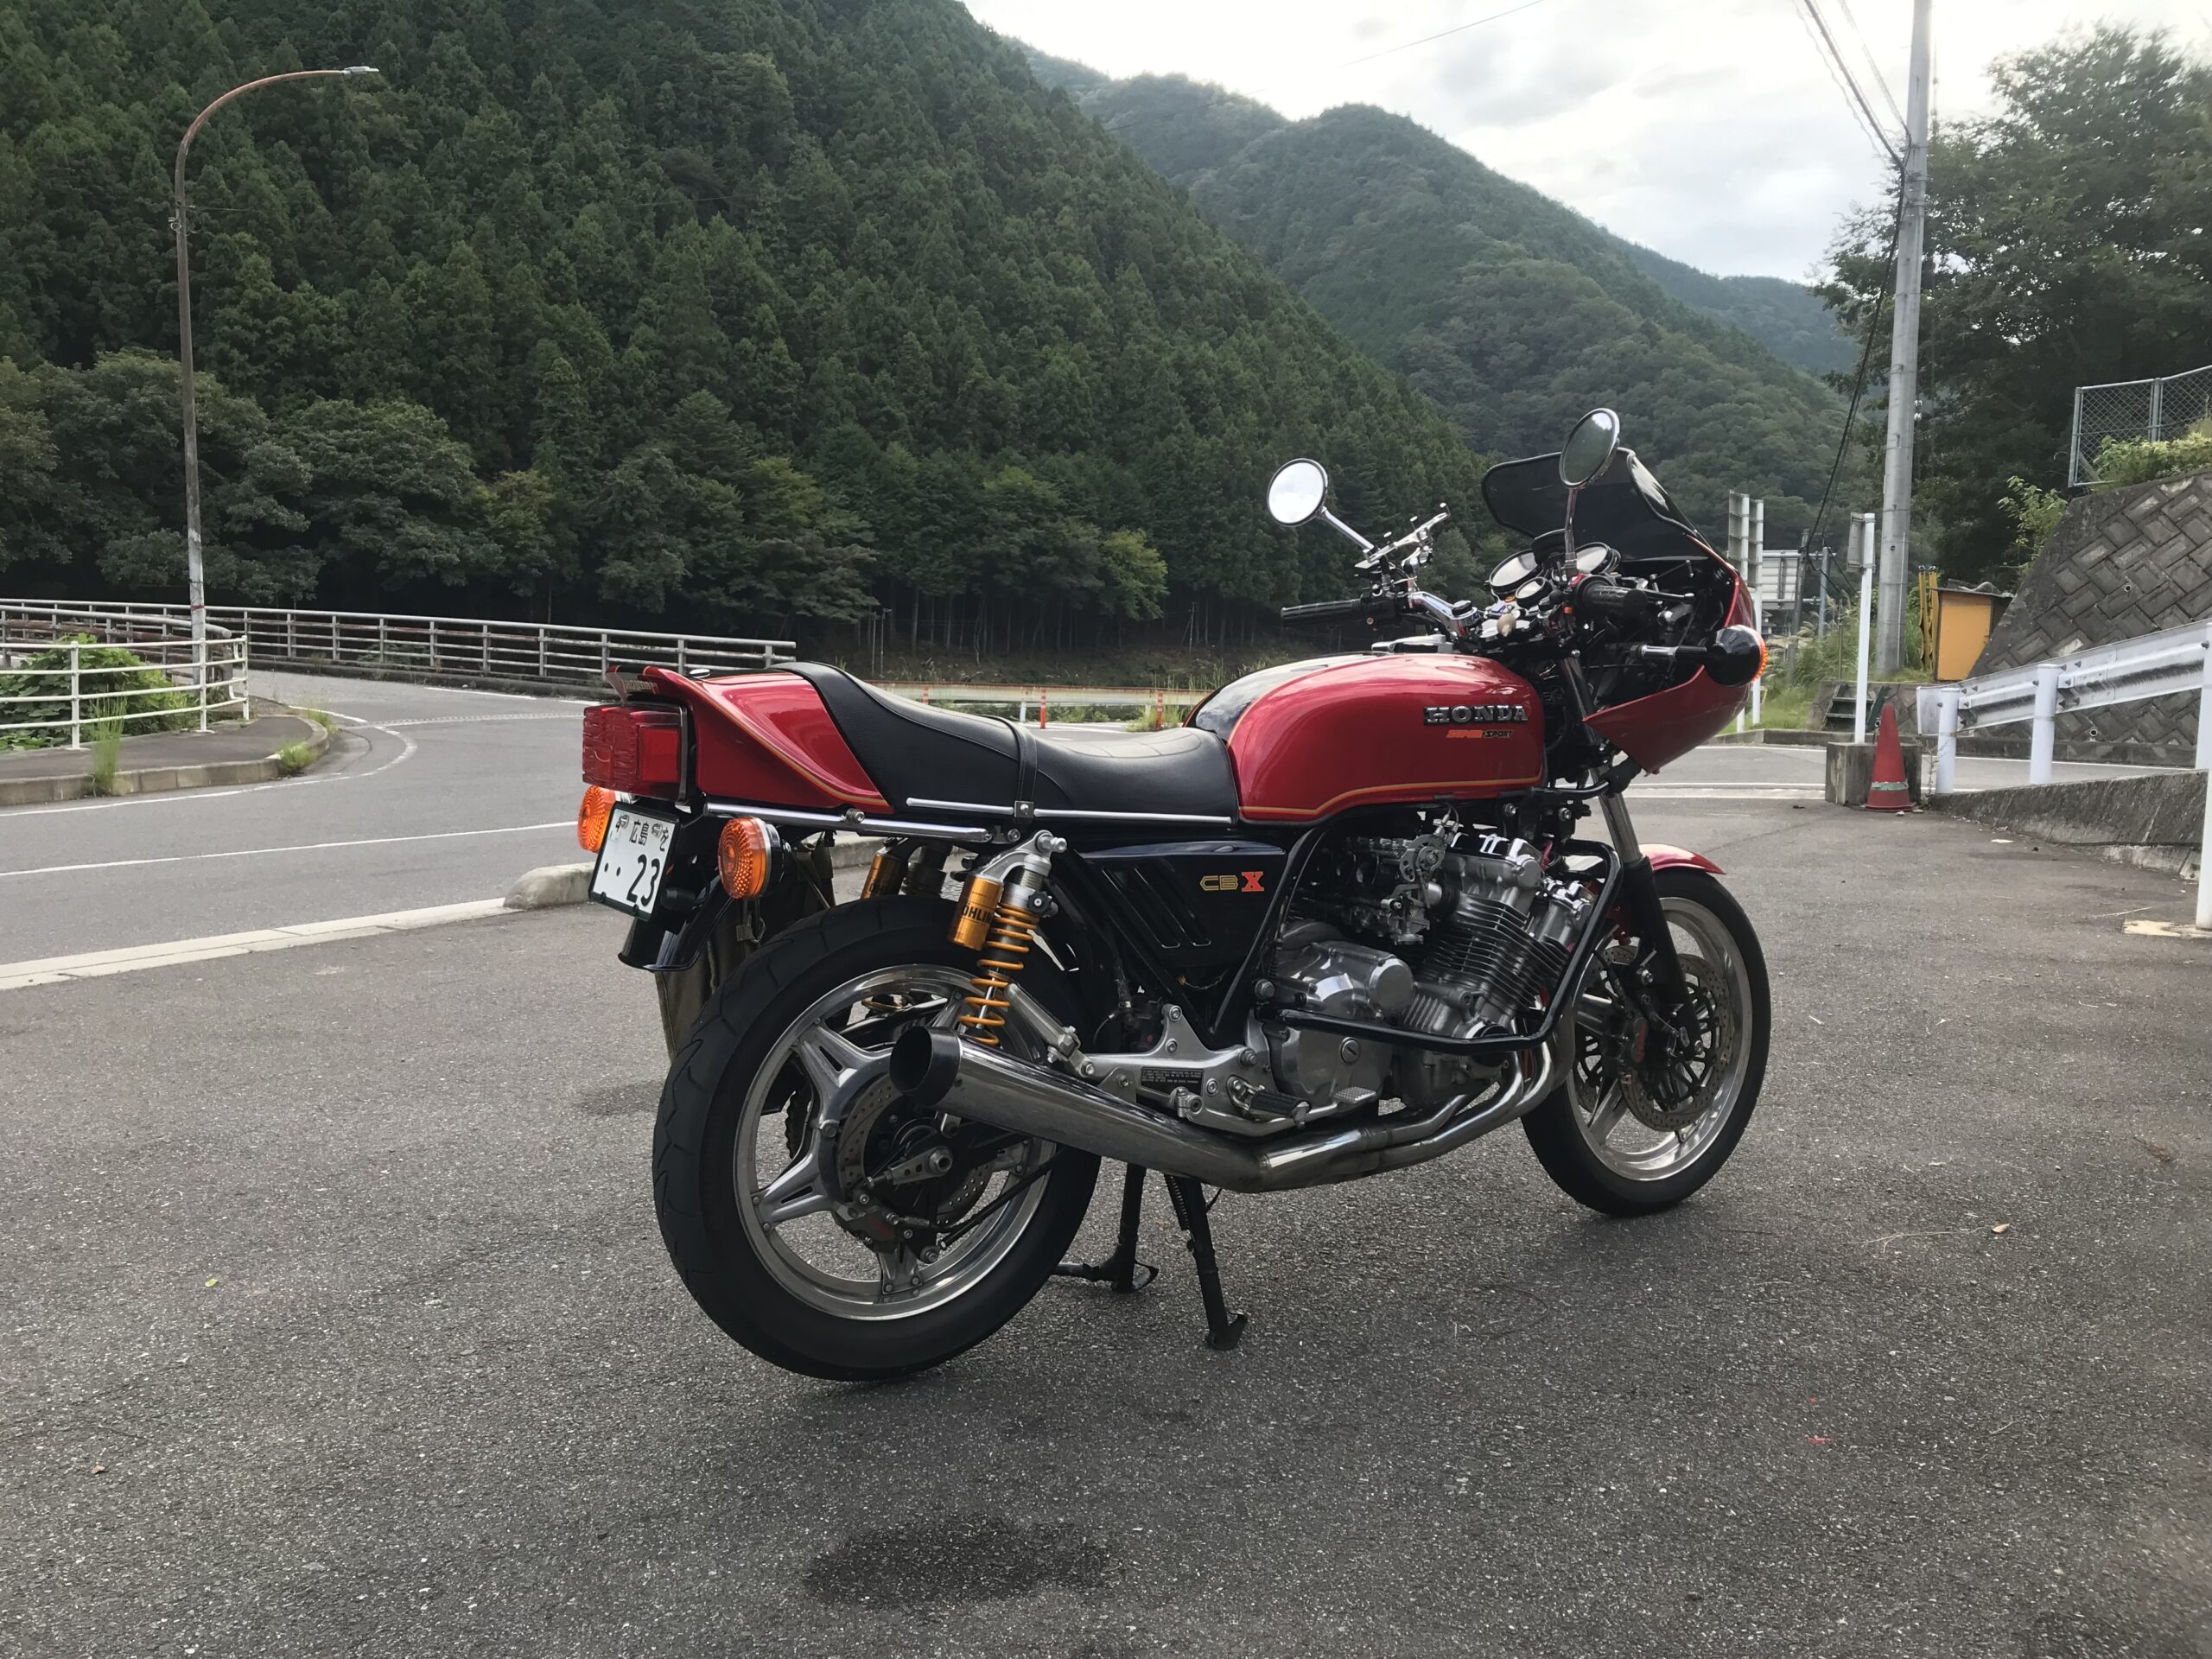 HONDA CBX1000-Tuning deep in the mountains